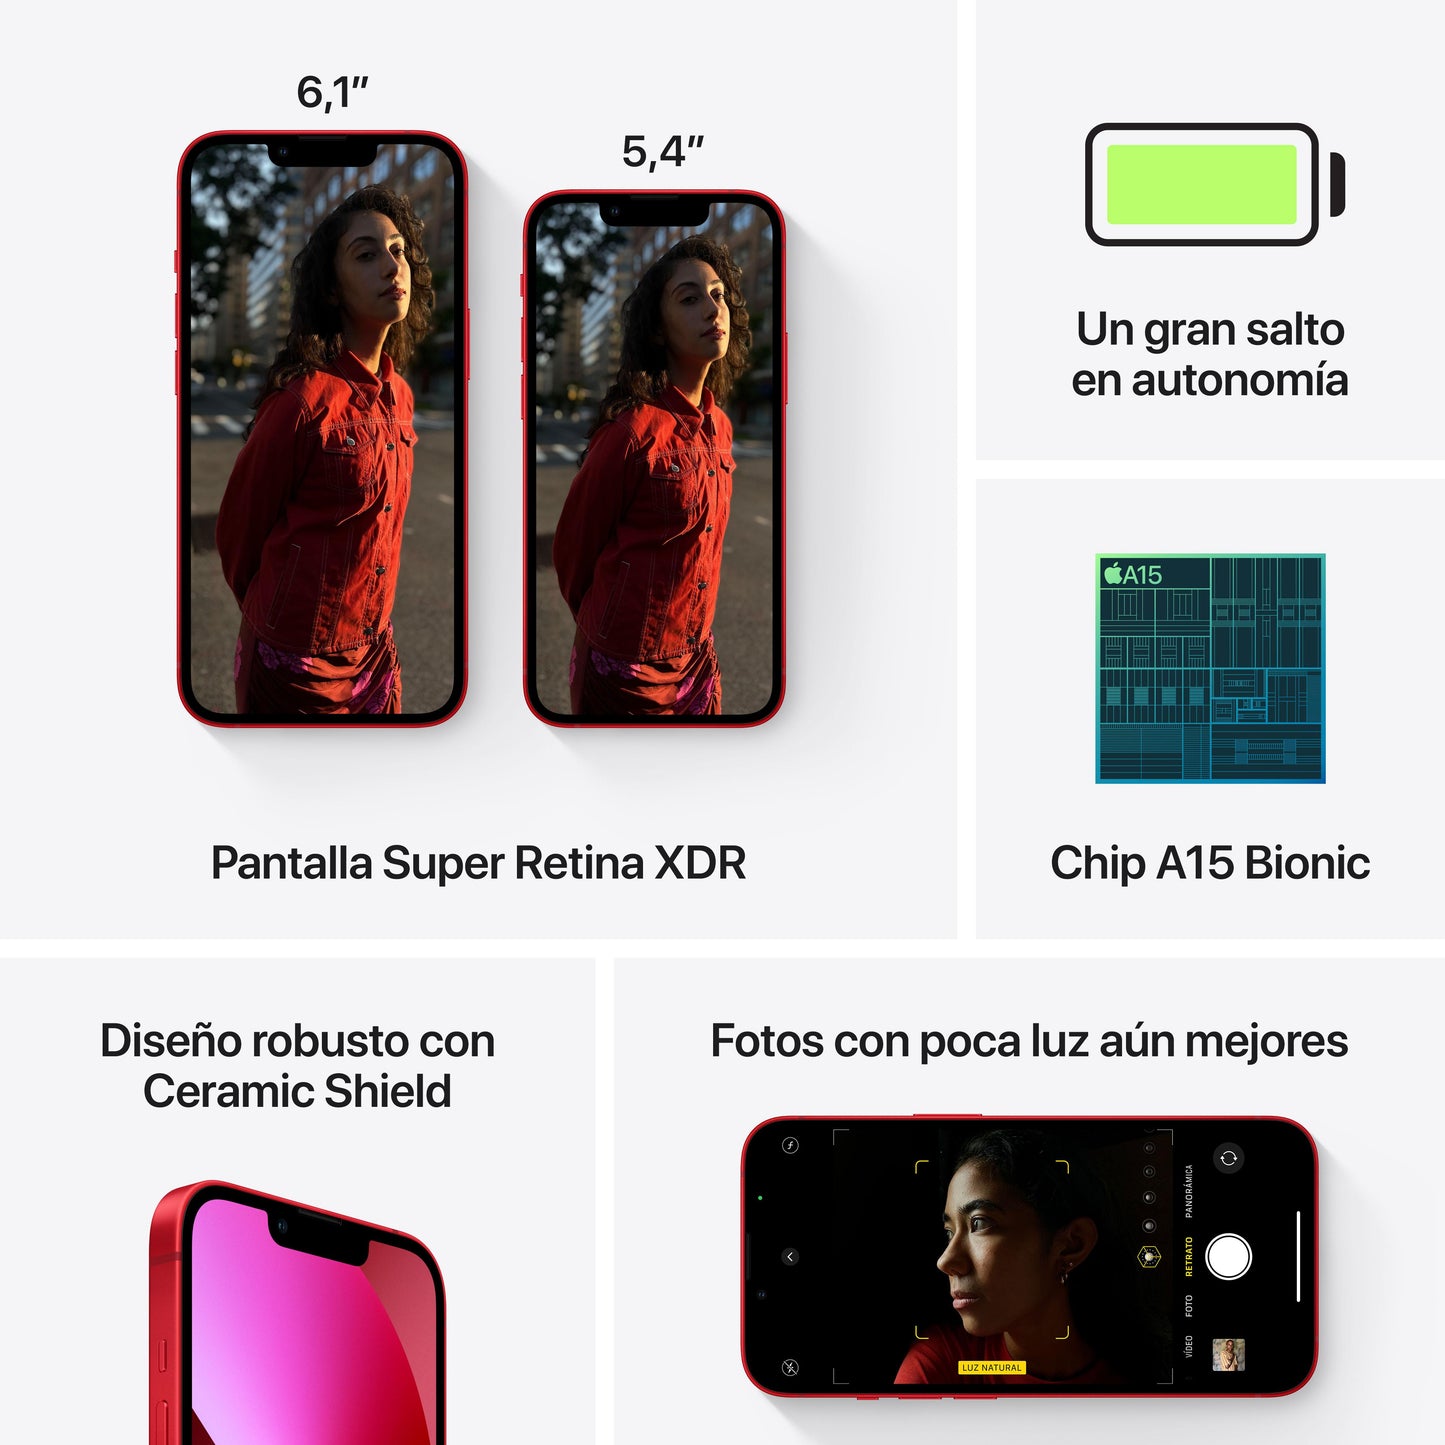 iPhone 13 mini 512 GB (PRODUCT)RED - Rossellimac